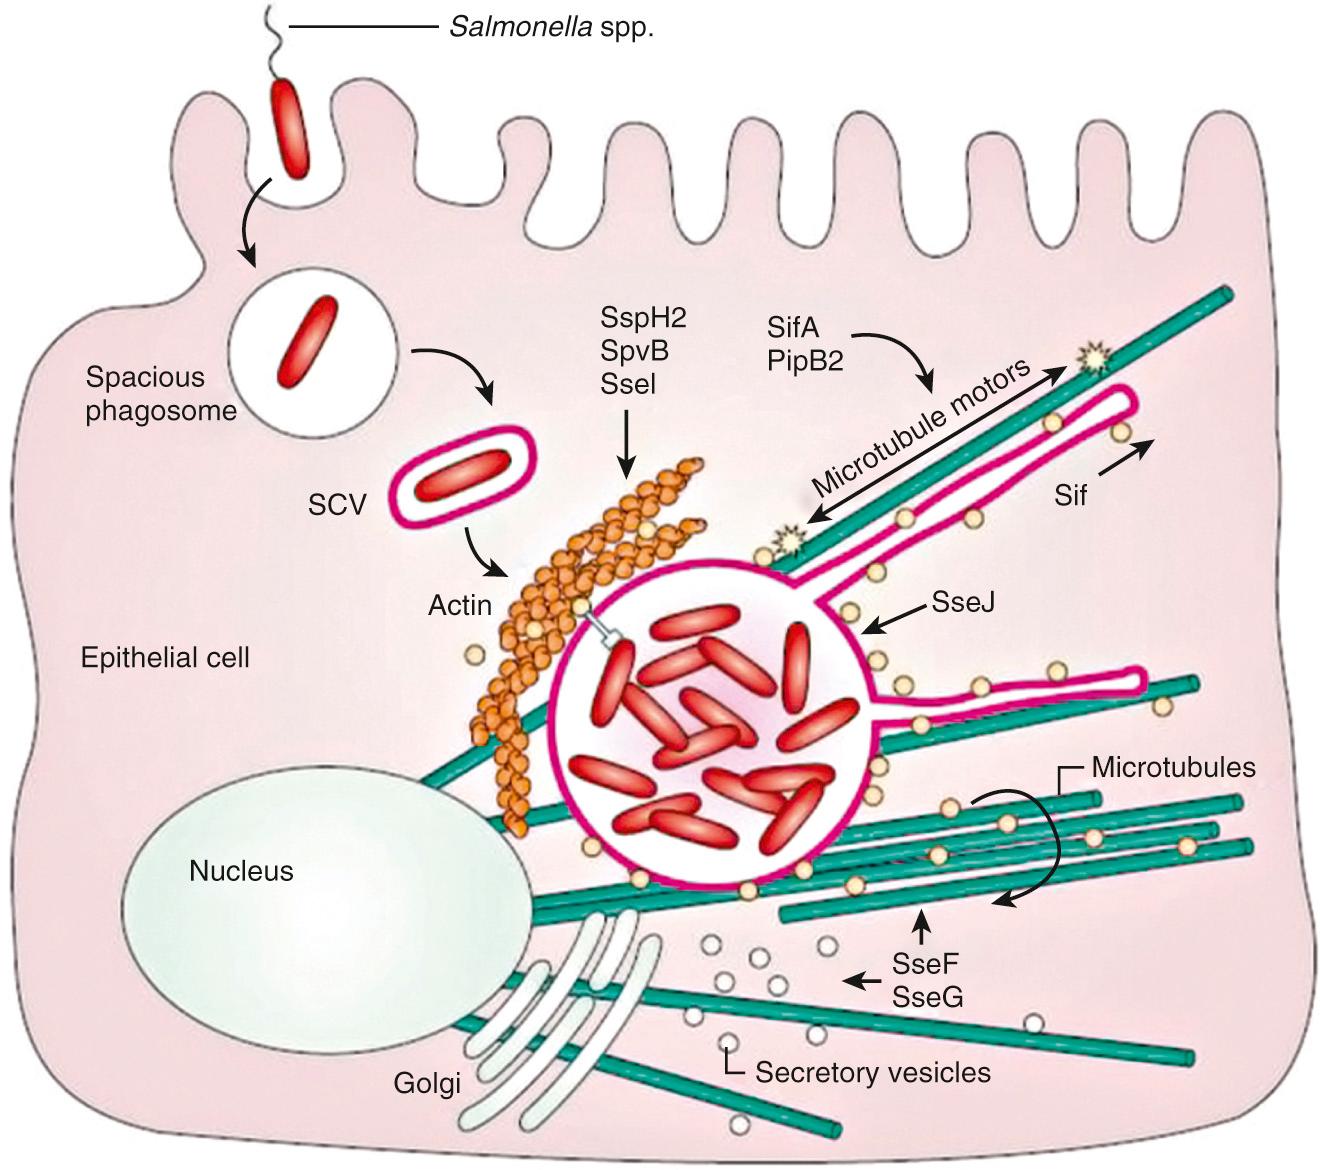 Fig. 225.3, Formation of the Salmonella -containing vacuole (SCV) and induction of the Salmonella pathogenicity island 2 (SPI-2) type III secretion system (TTSS) within the host cell. Shortly after internalization by macropinocytosis, salmonellae are enclosed in a spacious phagosome that is formed by membrane ruffles. Later, the phagosome fuses with lysosomes, acidifies, and shrinks to become adherent around the bacterium, and is called the SCV. It contains the endocytic marker lysosomal-associated membrane protein 1 (LAMP-1; purple ). The Salmonella SPI-2 is induced within the SCV and translocates effector proteins (yellow spheres) across the phagosomal membrane several hours after phagocytosis. The SPI-2 effectors SifA and PipB2 contribute to formation of Salmonella -induced filament along microtubules (green) and regulate microtubule motor (yellow star shape) accumulation on the Sif and the SCV. SseJ is a deacylase that is active on the phagosome membrane. SseF and SseG cause microtubule bundling adjacent to the SCV and direct Golgi-derived vesicle traffic toward the SCV. Actin accumulates around the SCV in an SPI-2–dependent manner, in which SspH2, SpvB, and SseI are thought to have a role.